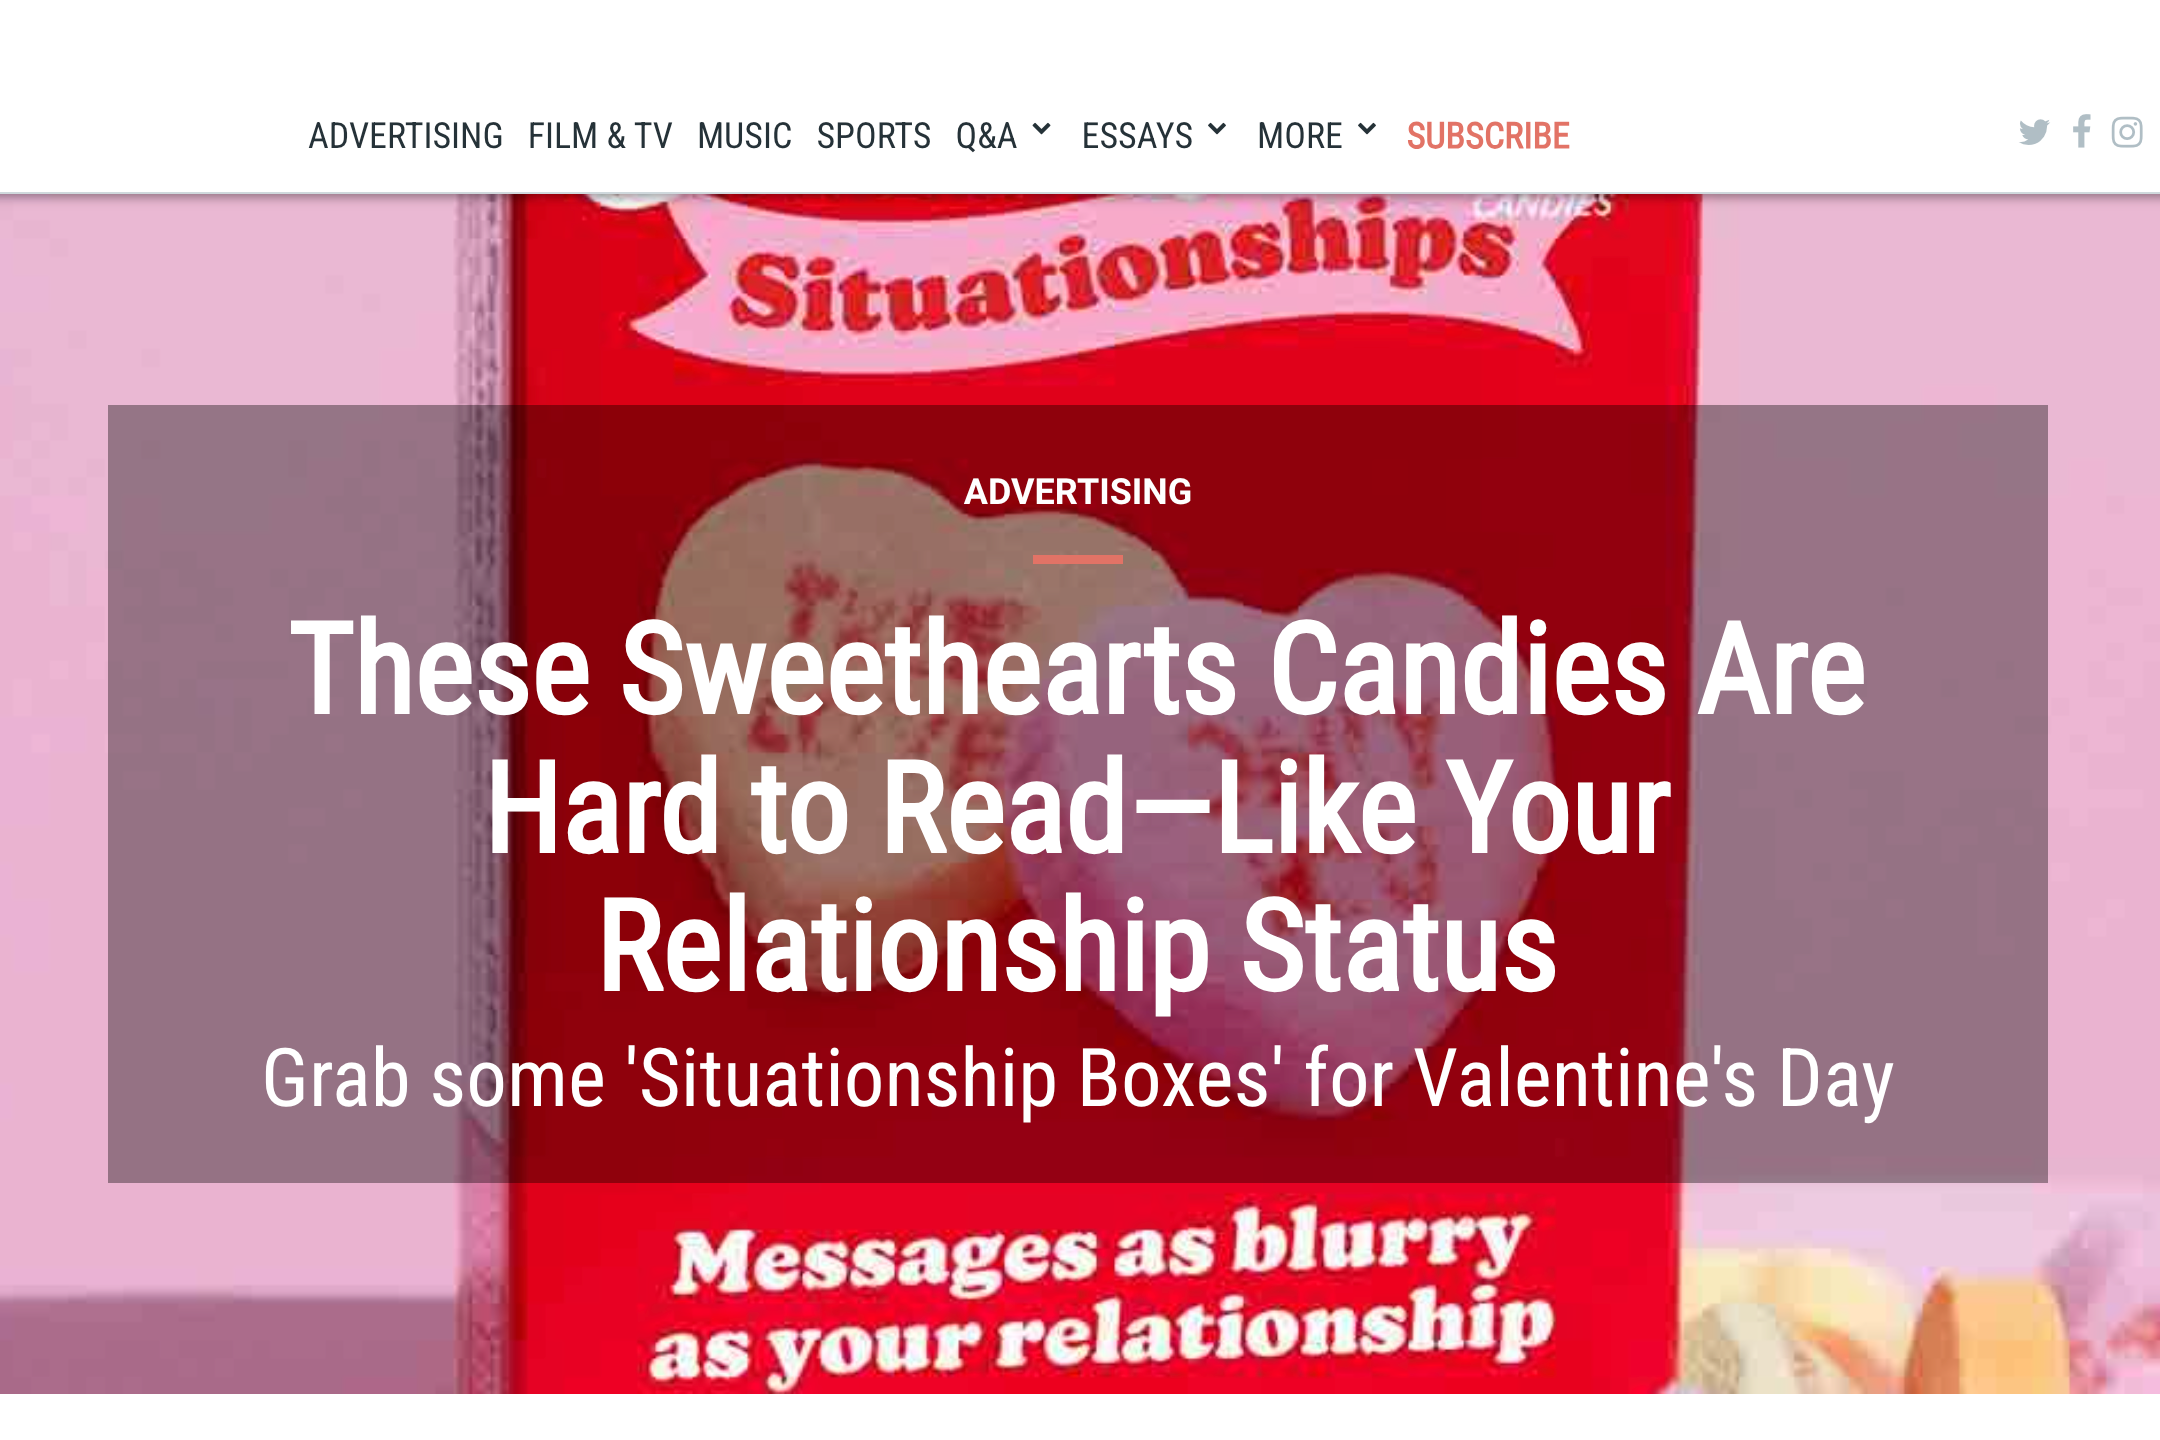 Muse by Clio: Tombras Creates "Situationship Boxes" for V-Day